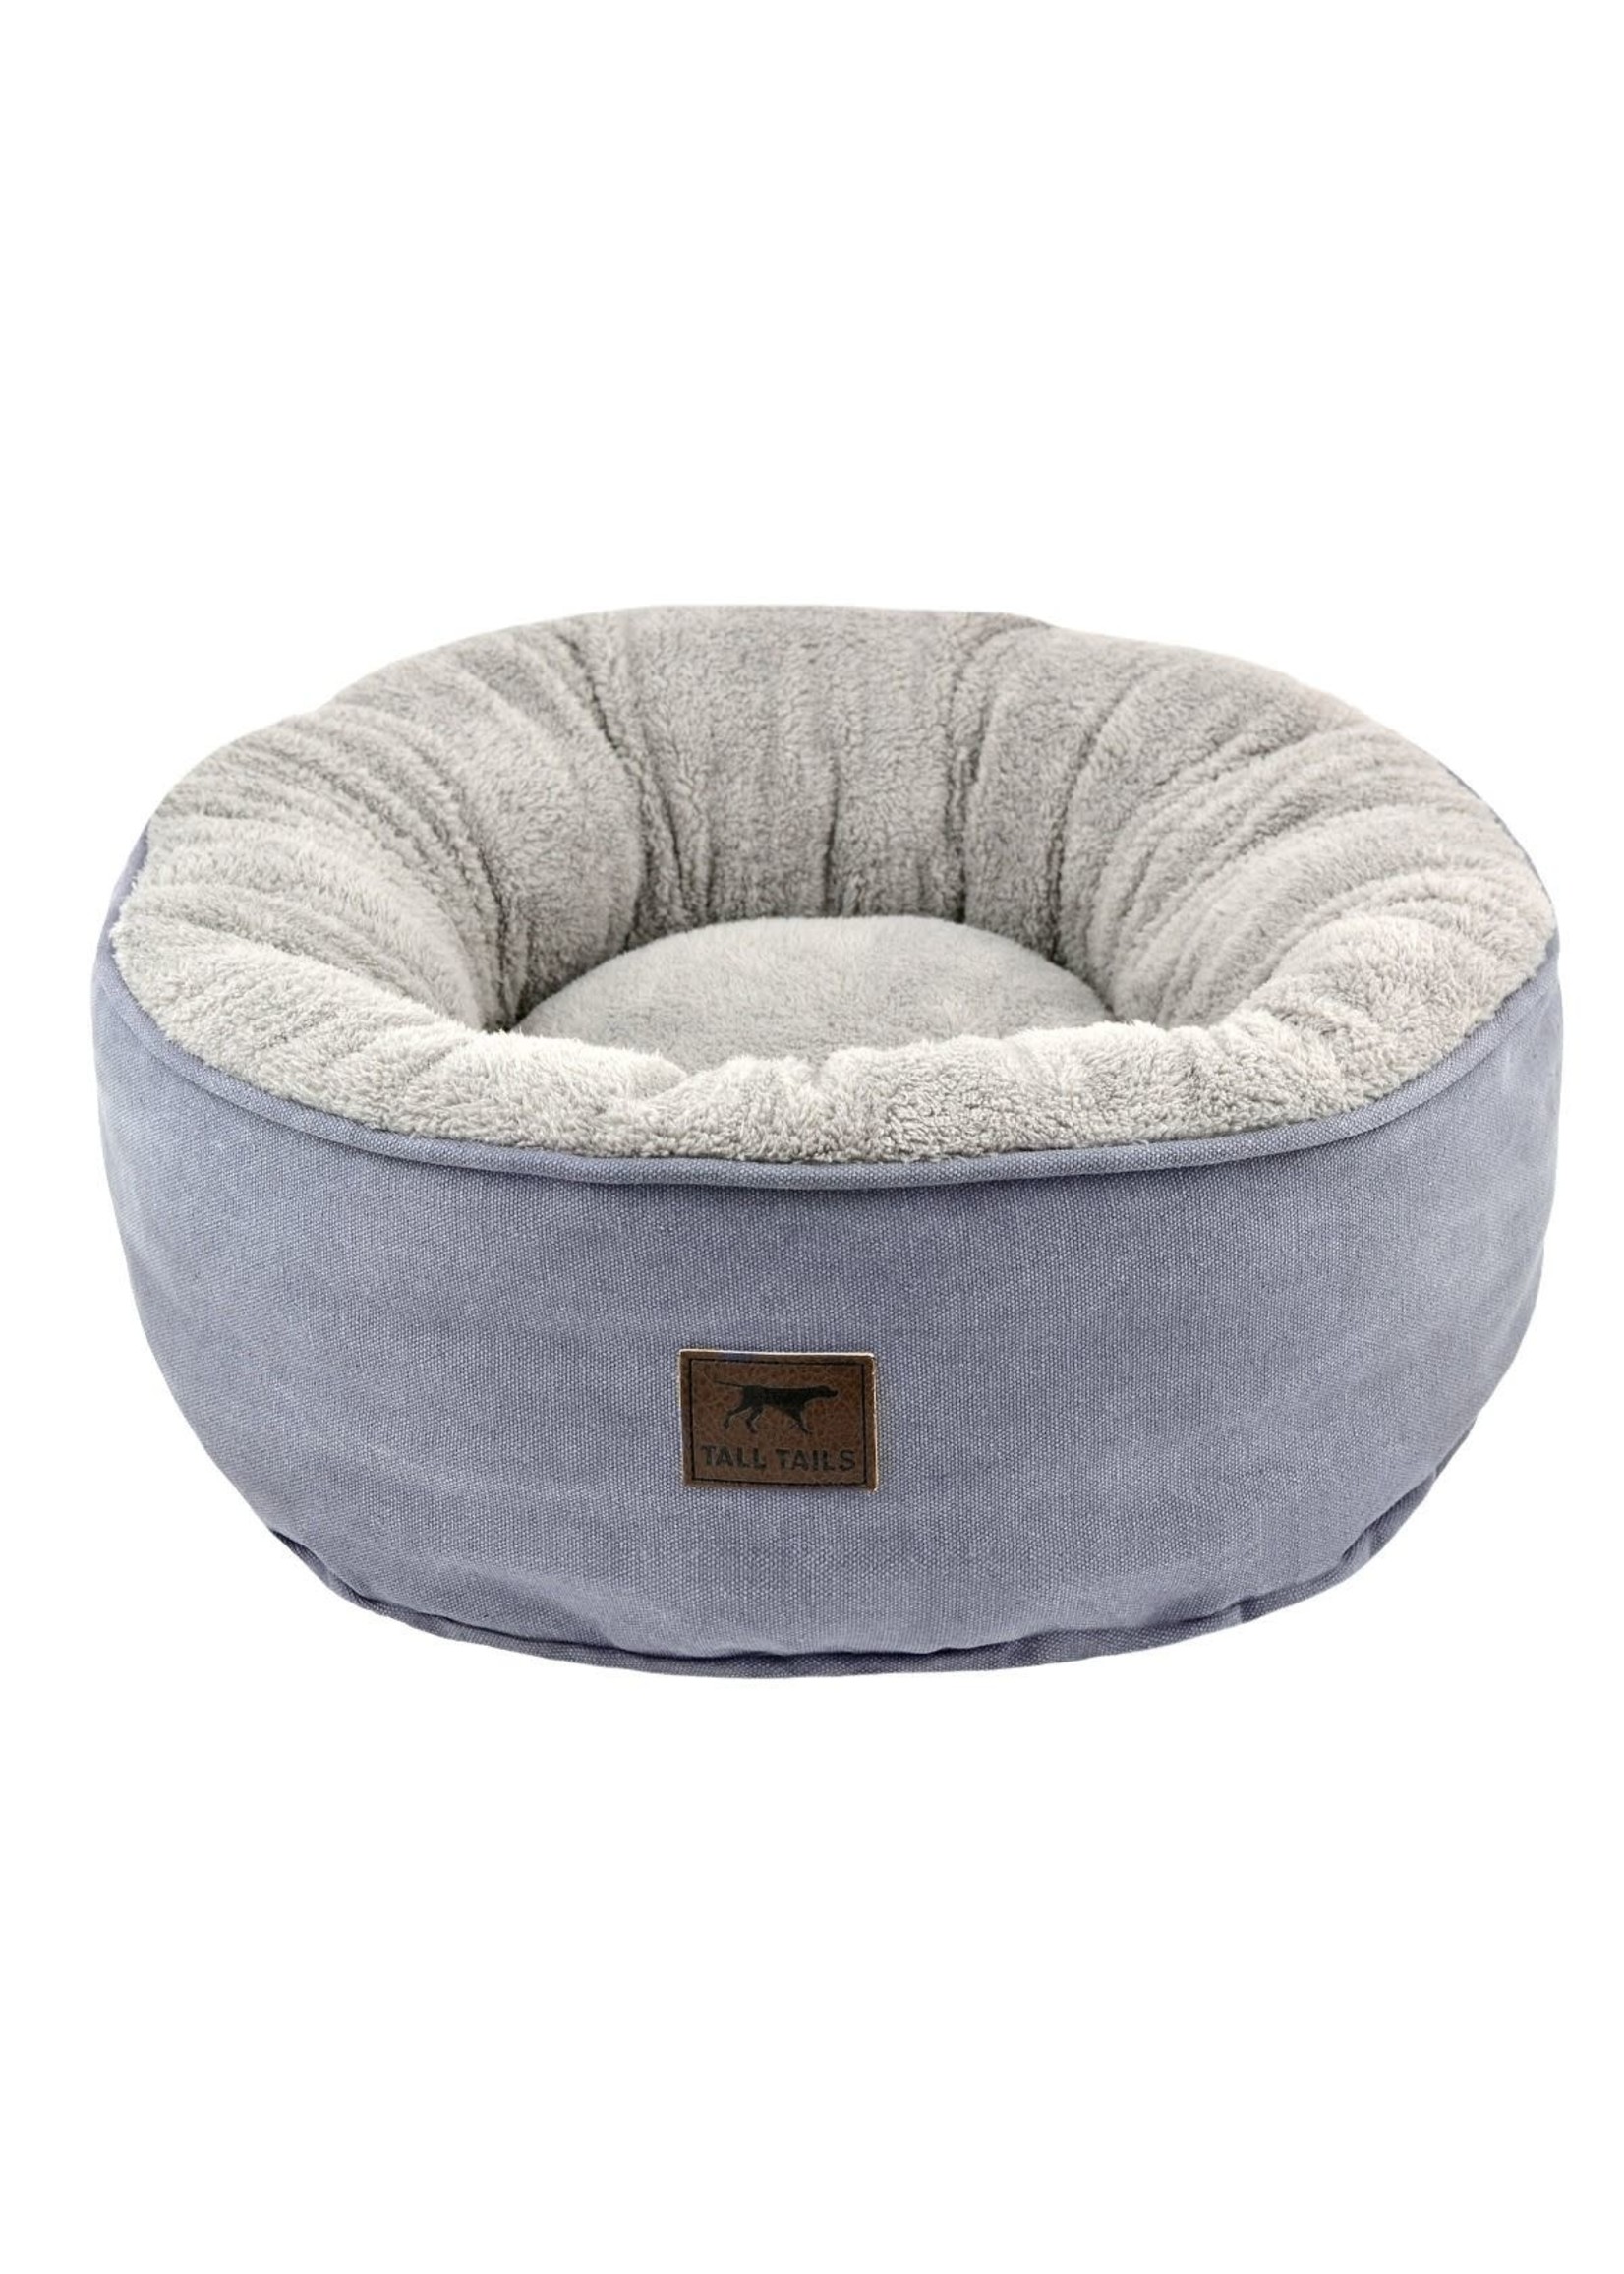 Tall Tails Tall Tails Donut Bed Charcoal S